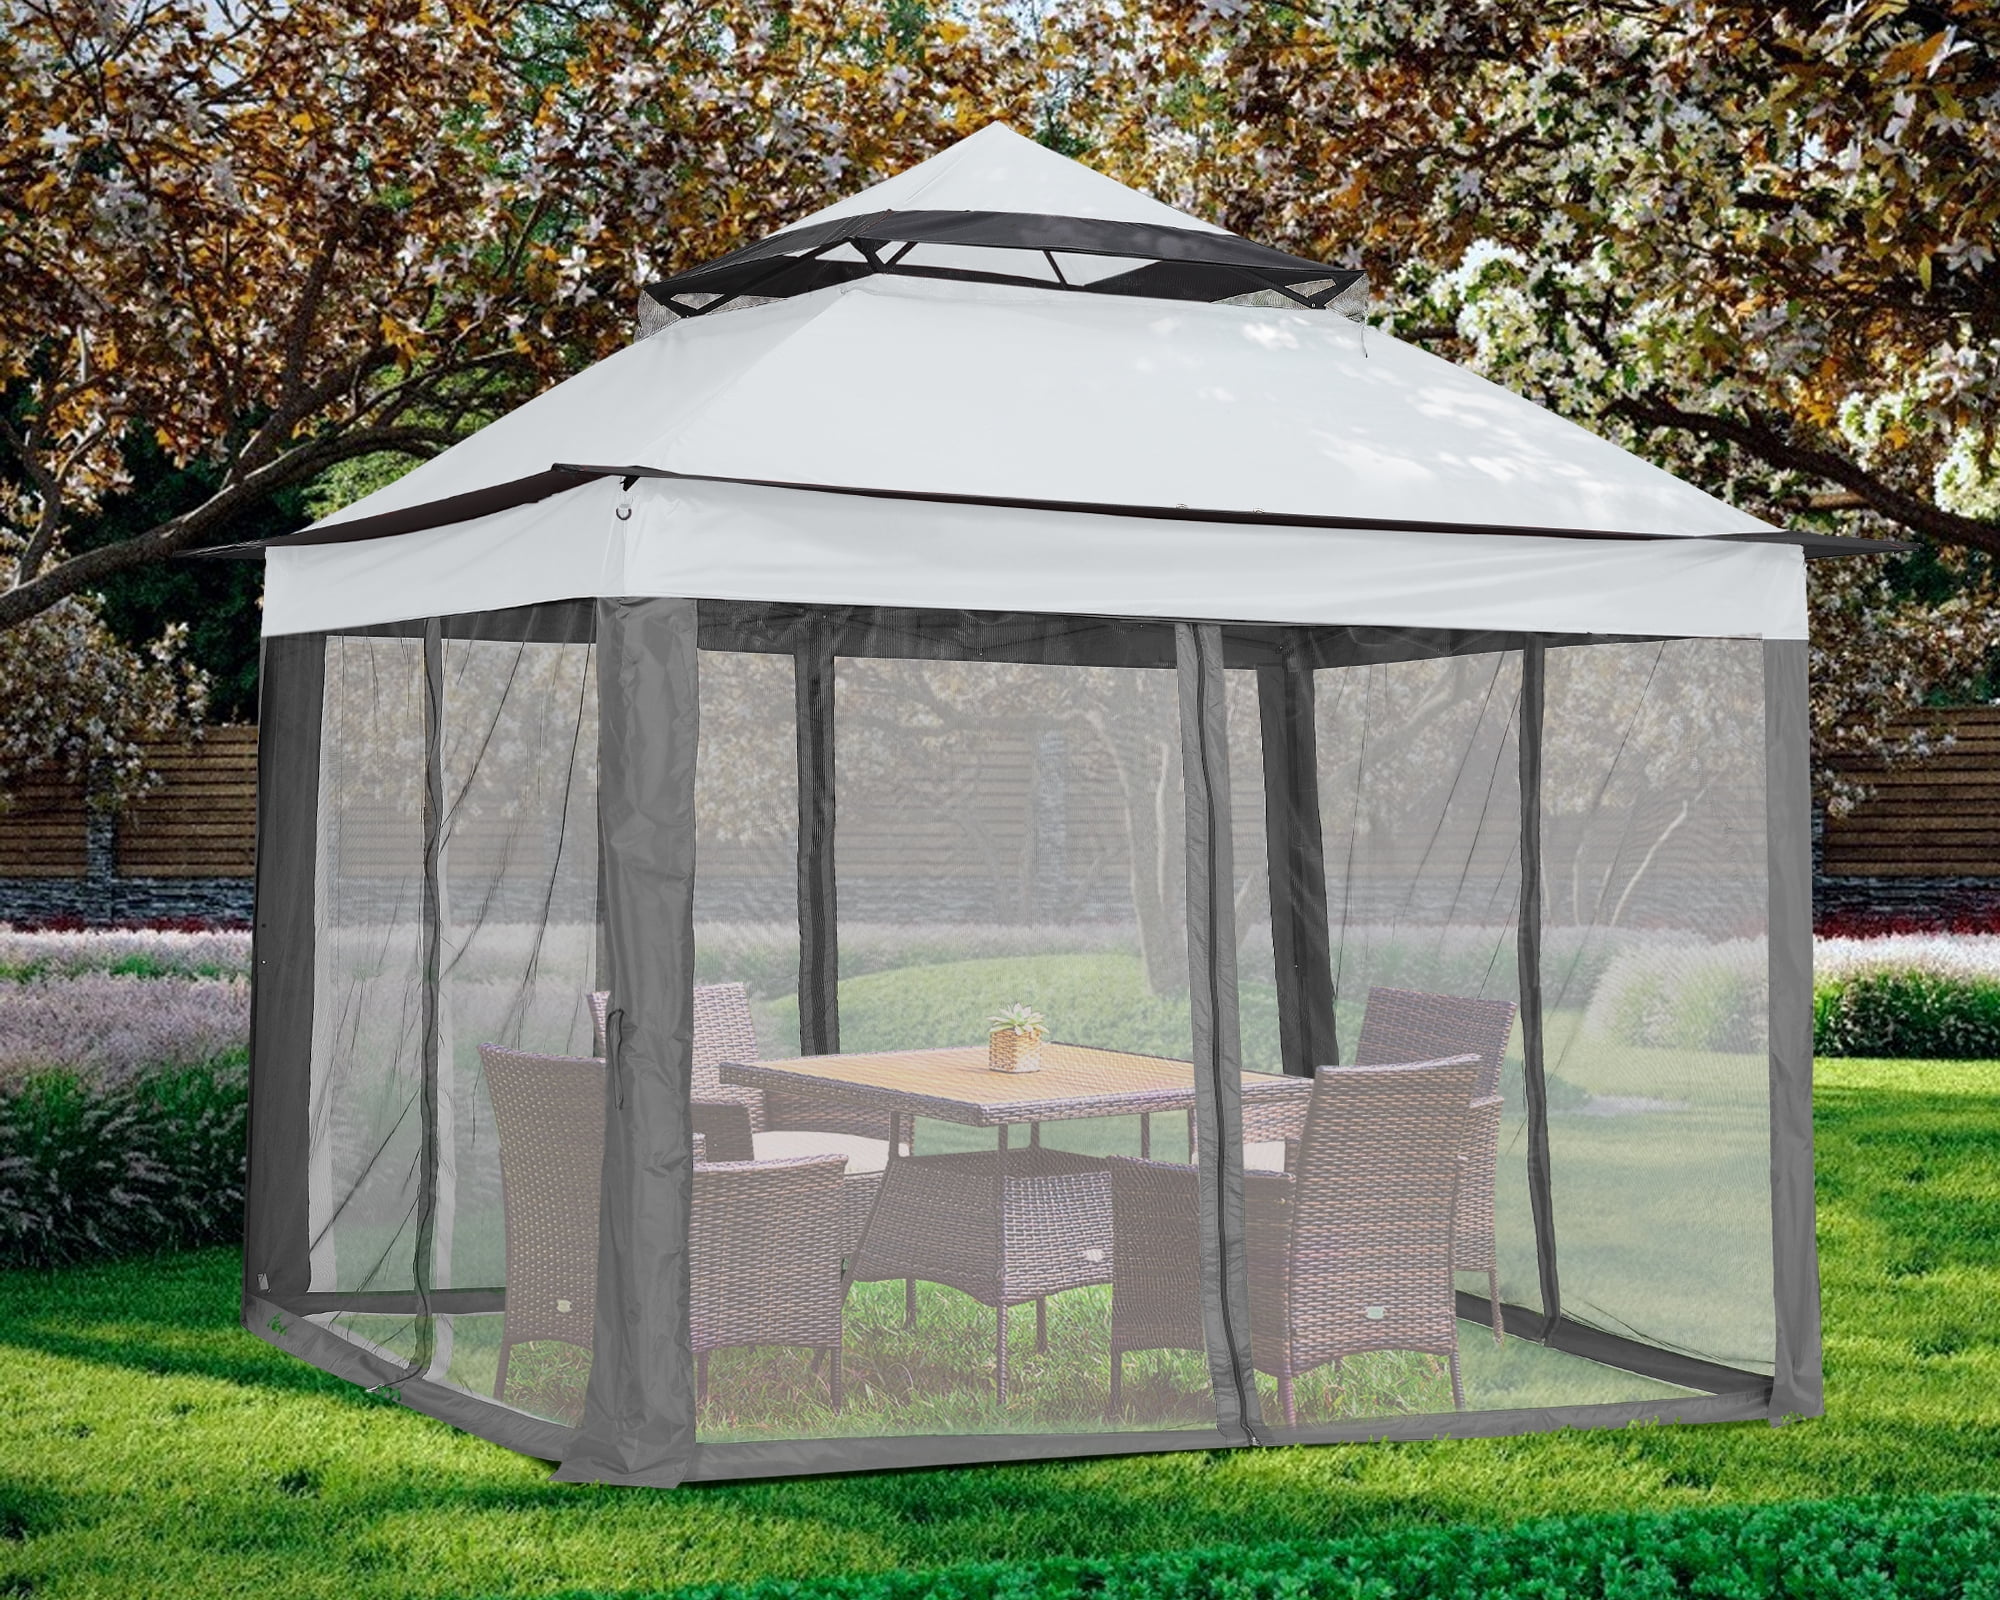 ABCCANOPY 13'x13' Gazebo Tent Outdoor Pop up Gazebo Canopy Shelter with Mosquito Netting, Brown